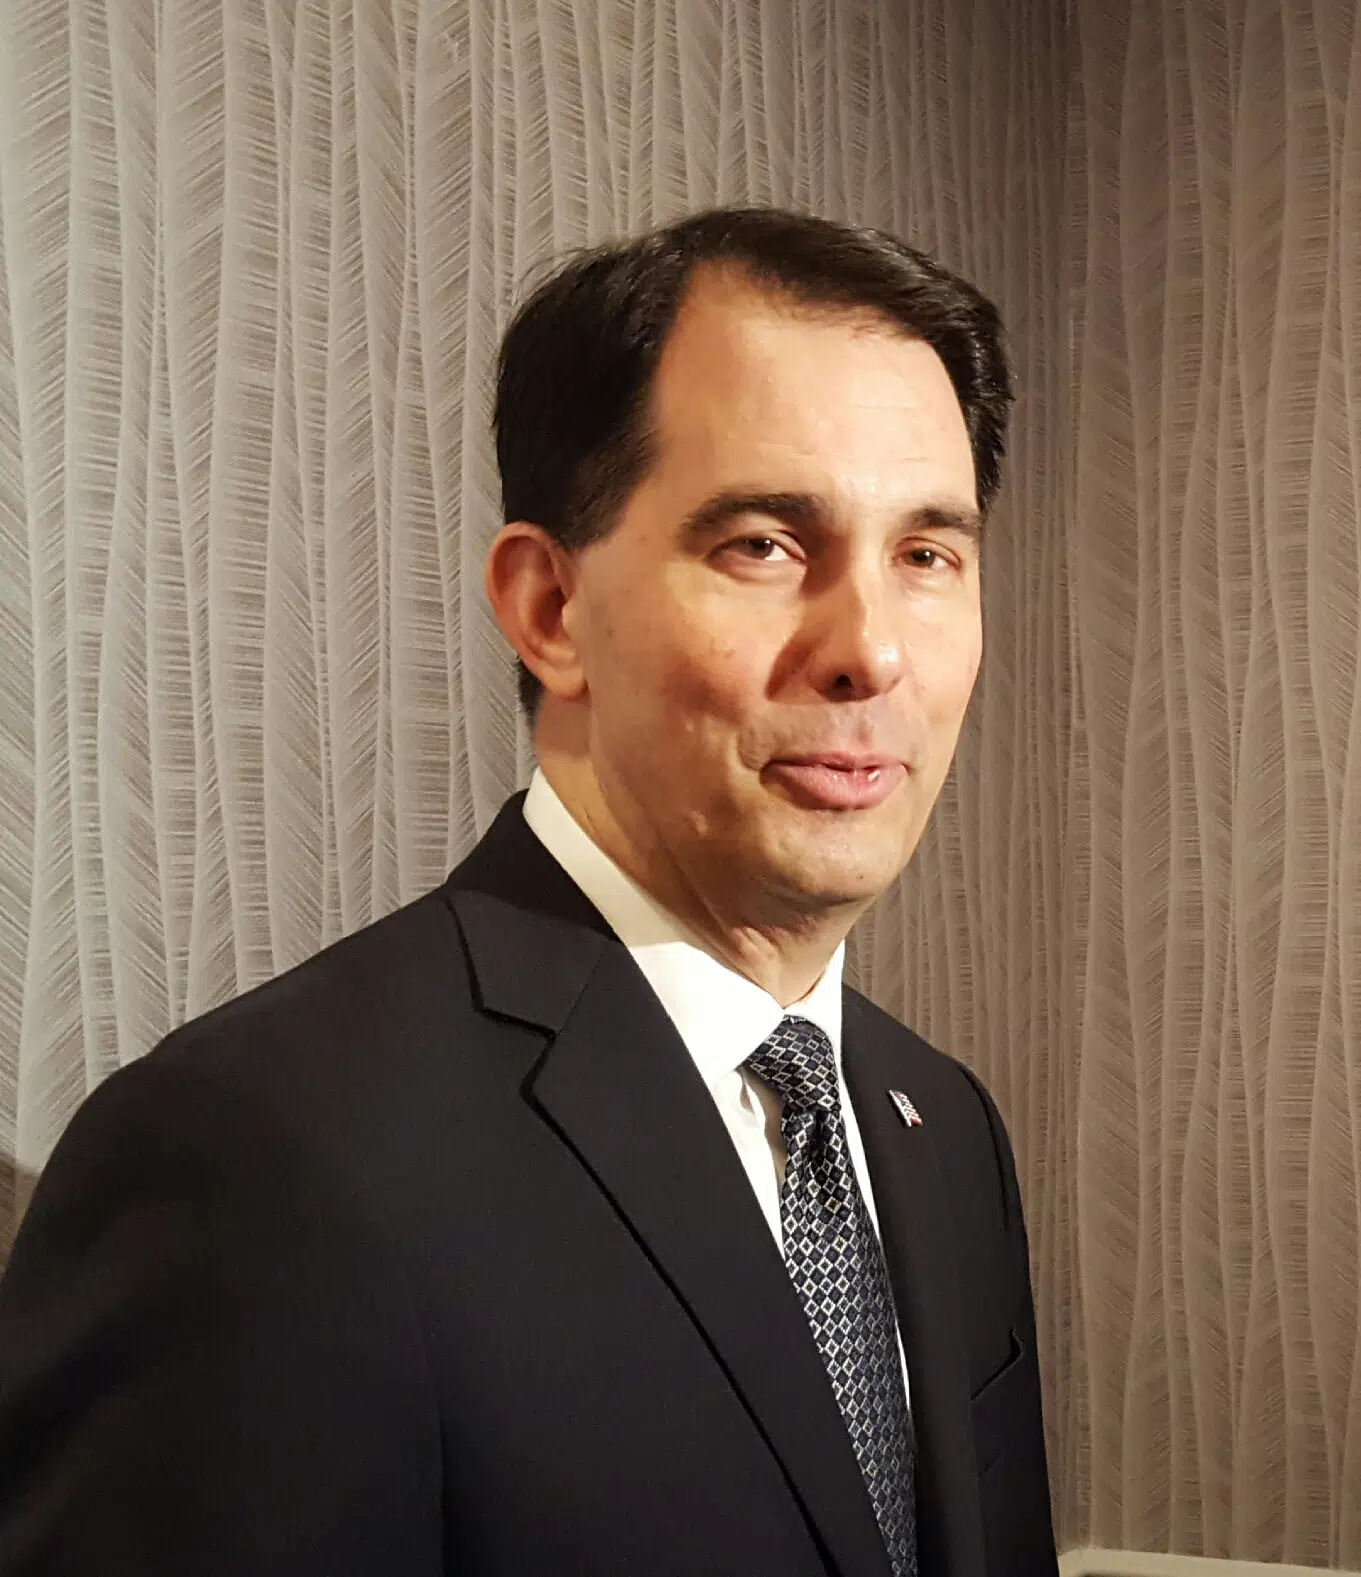 Governor Walker will be in New London for "Take Your Governor to Work Day"